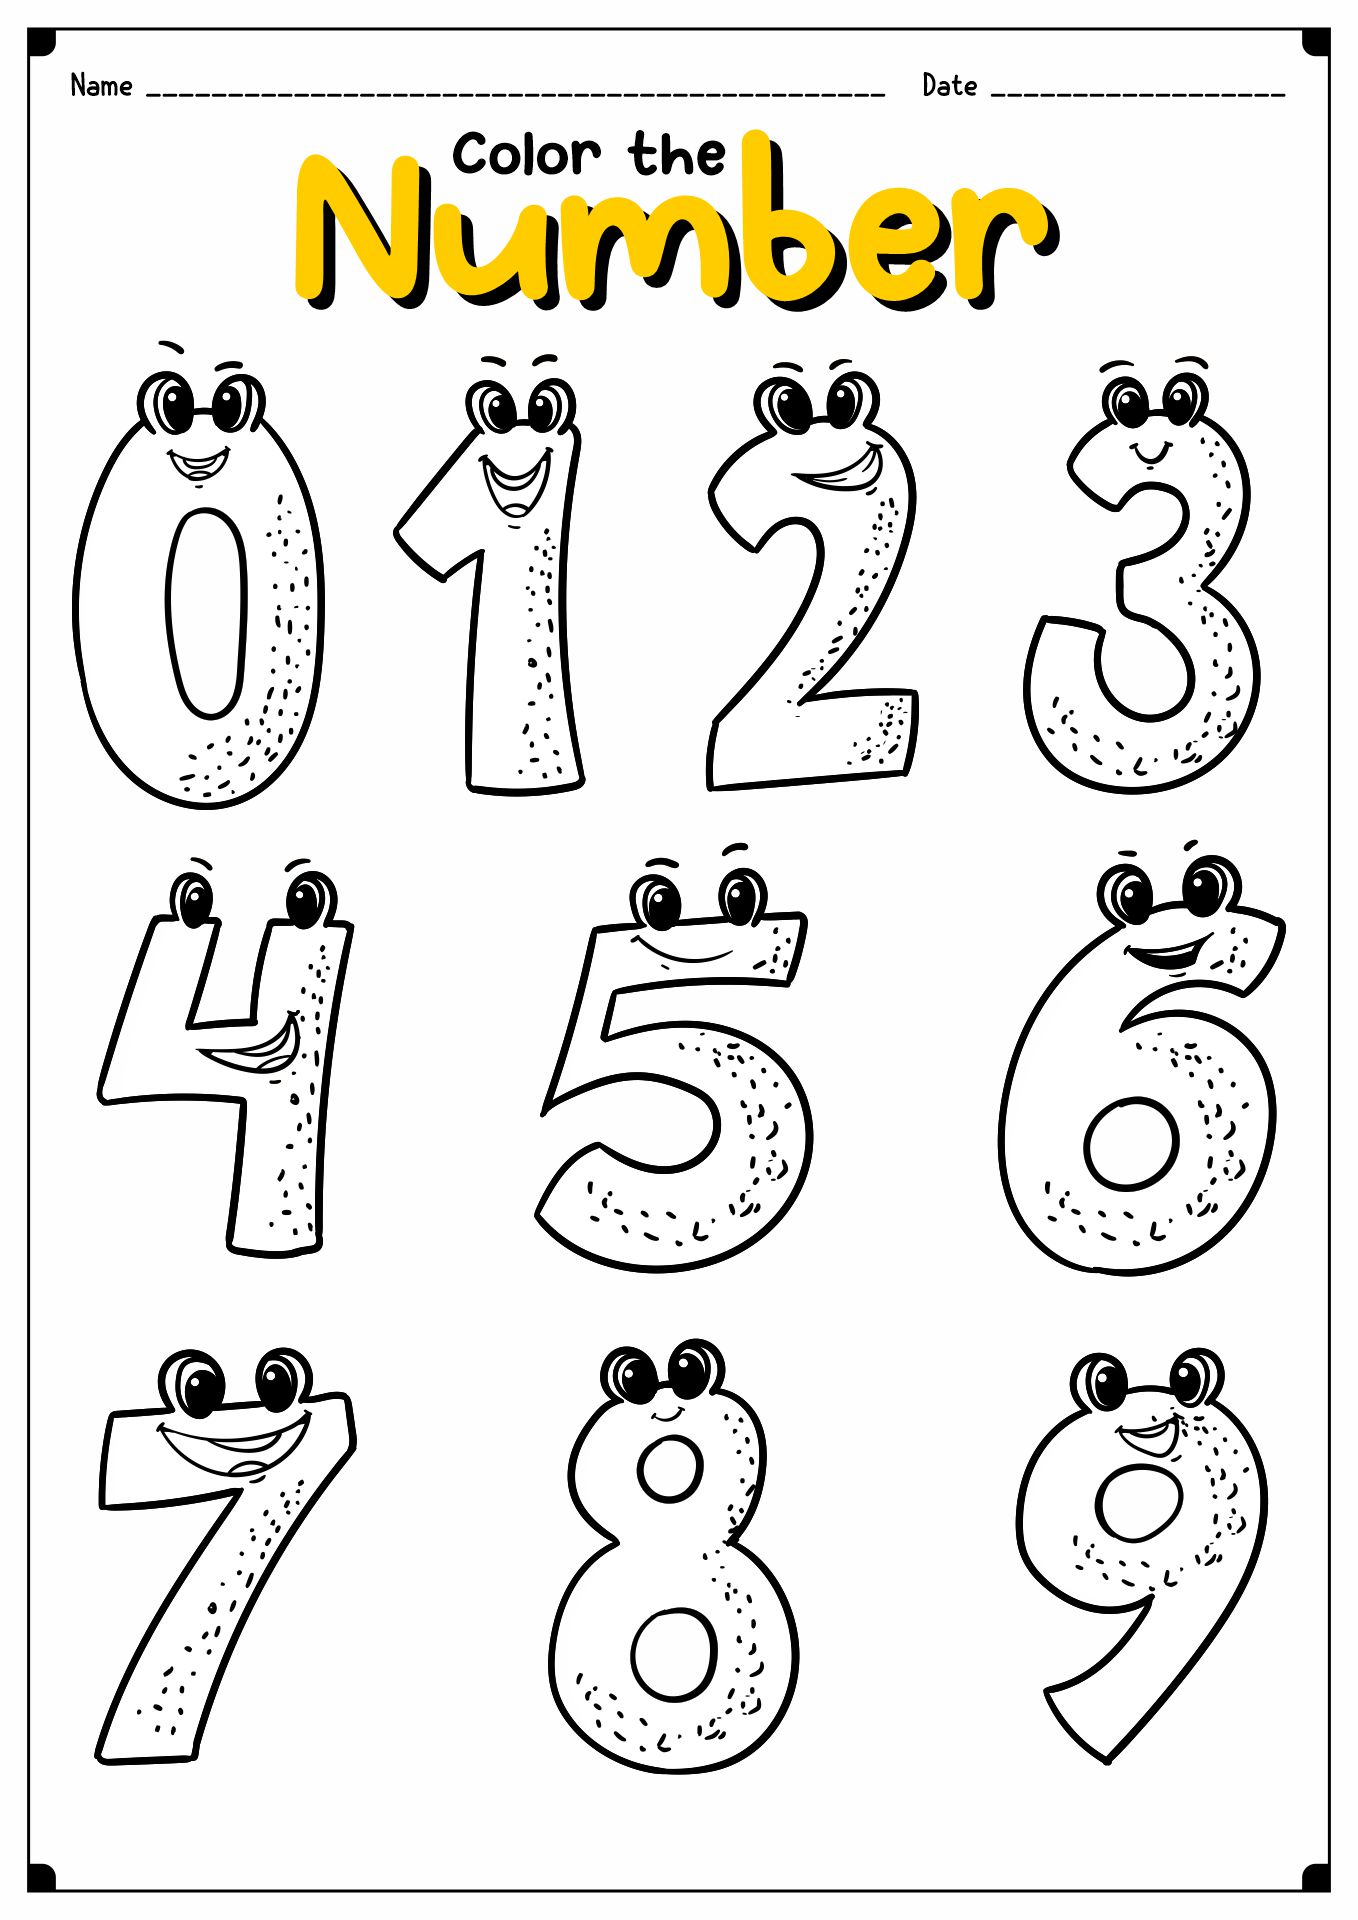 free printable number matching cards 1 20